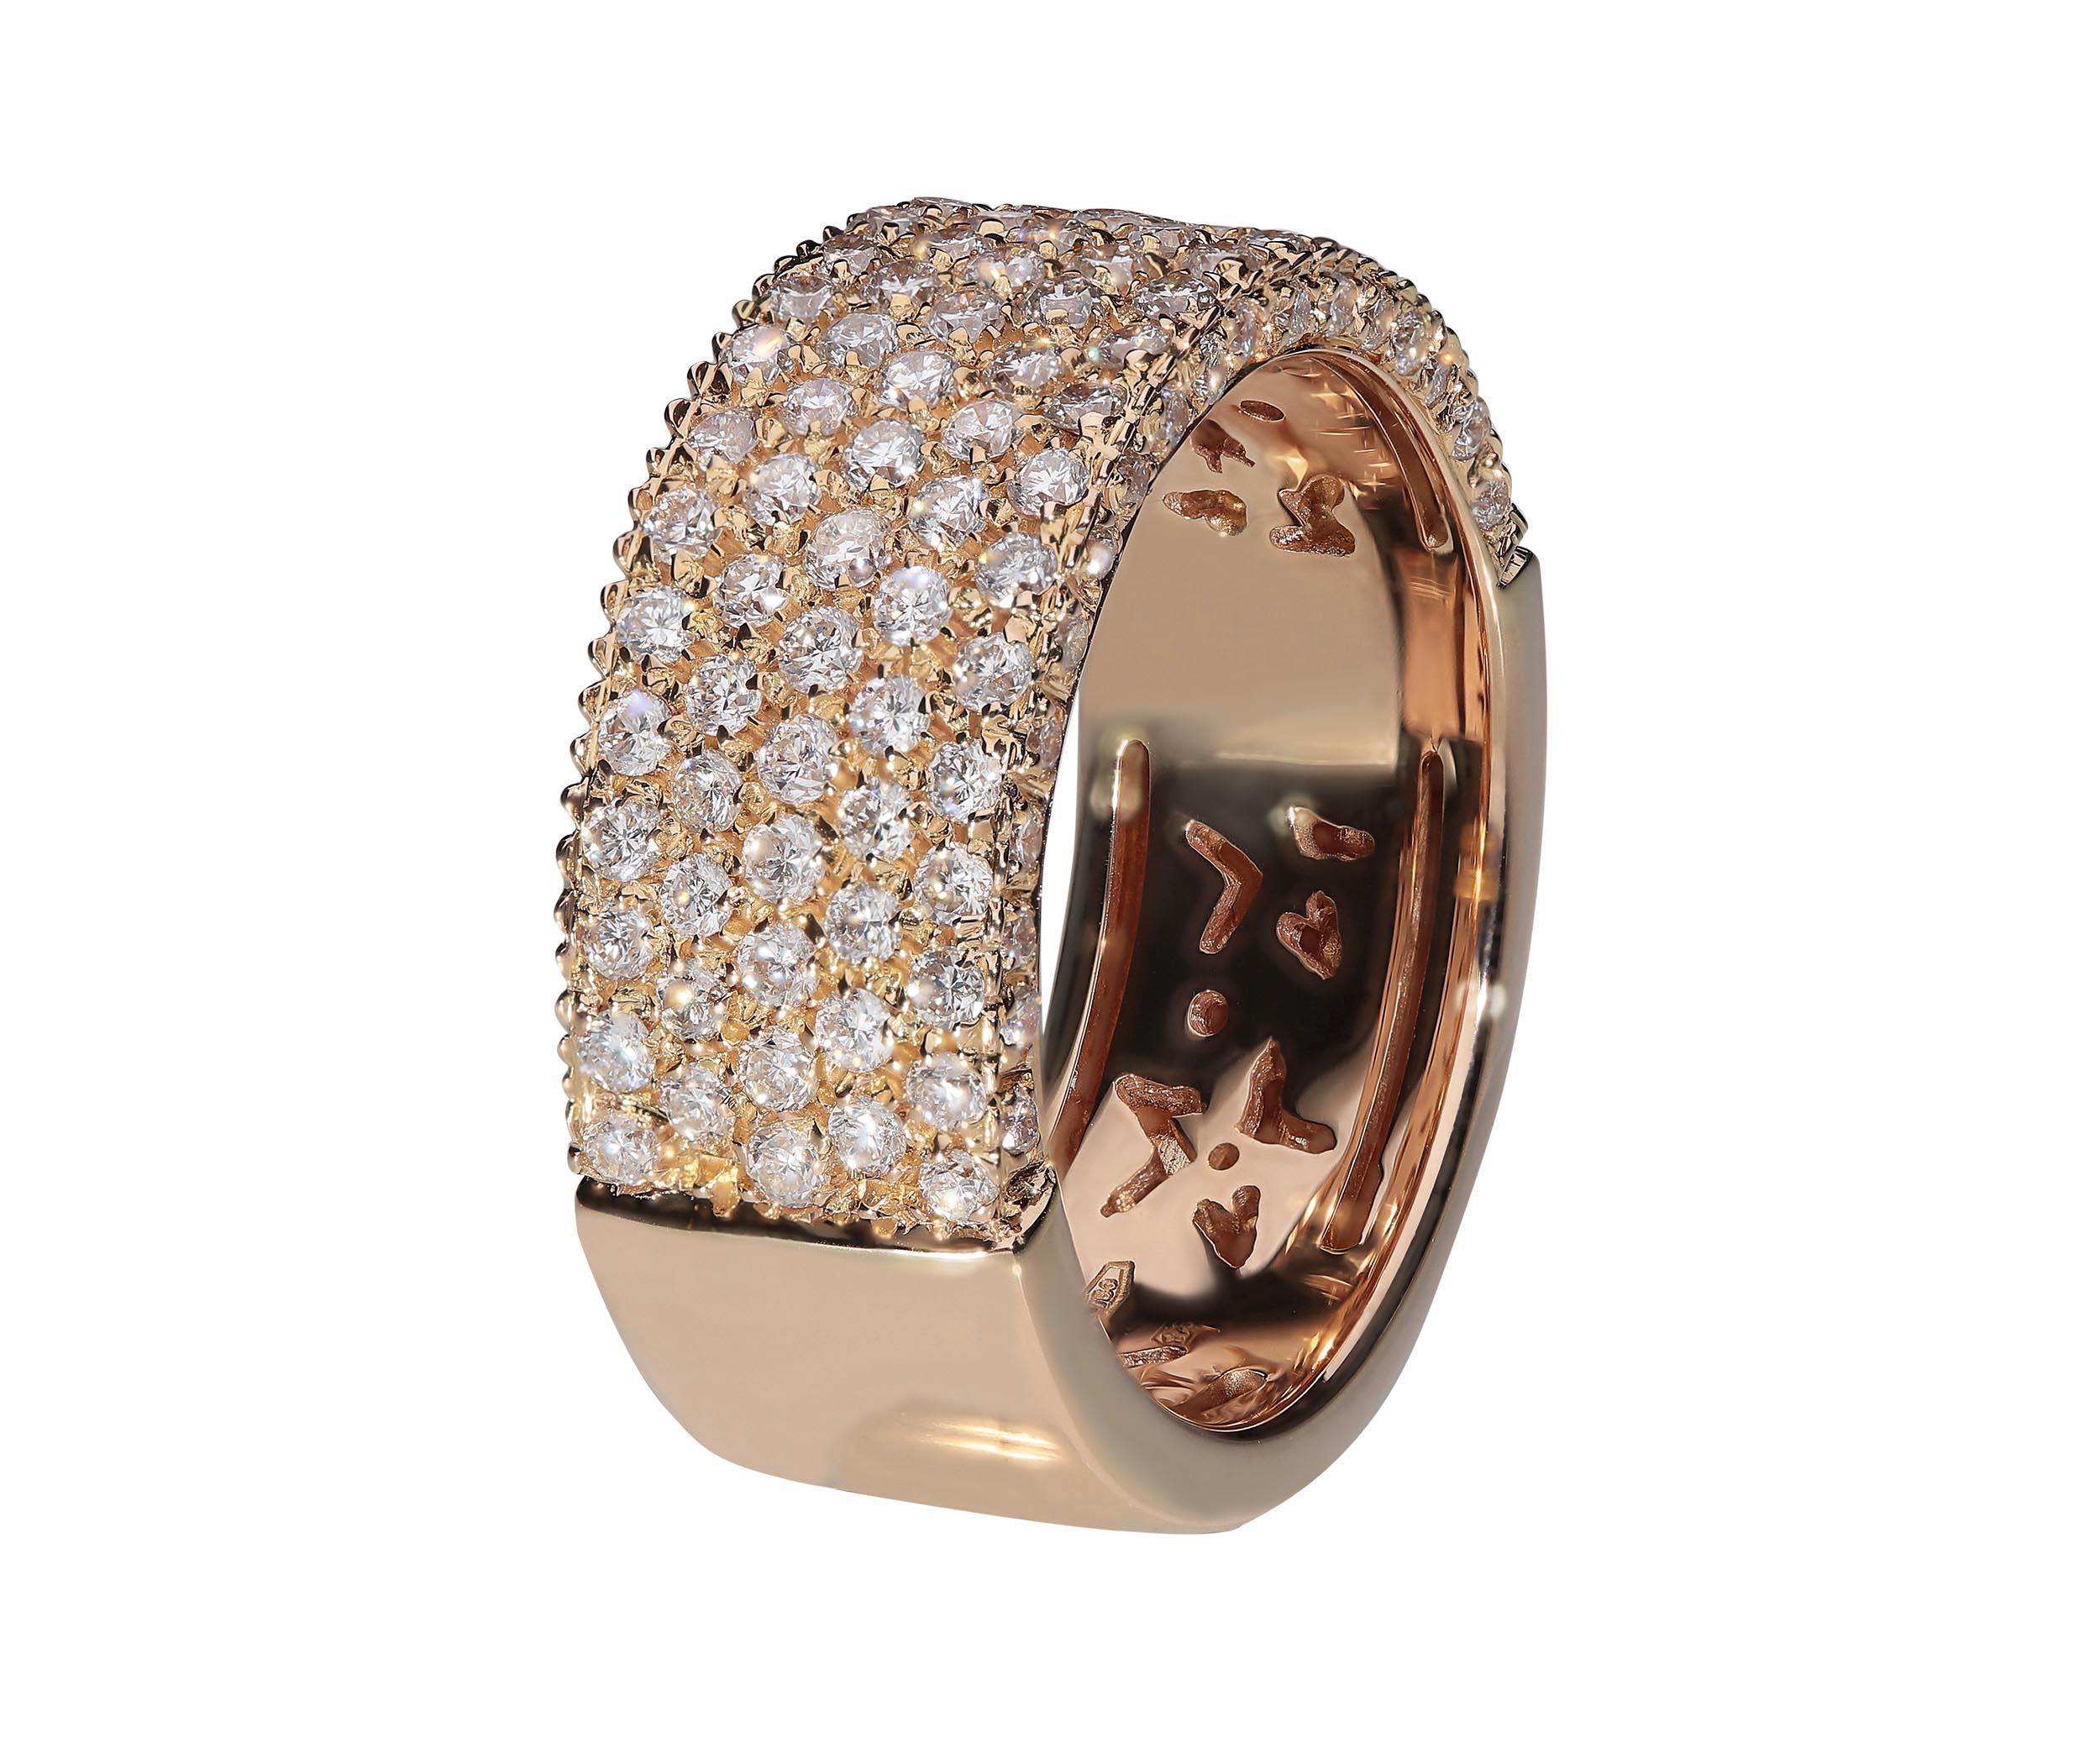 Comfortable 5 rows fashion band ring in 18kt pink gold for 9,90 grams and white round brilliant diamonds color G clarity VS for 1,40 carats.
The width of the ring is 8 millimeters and the height is 2 millimeters.
The internal part of the ring has